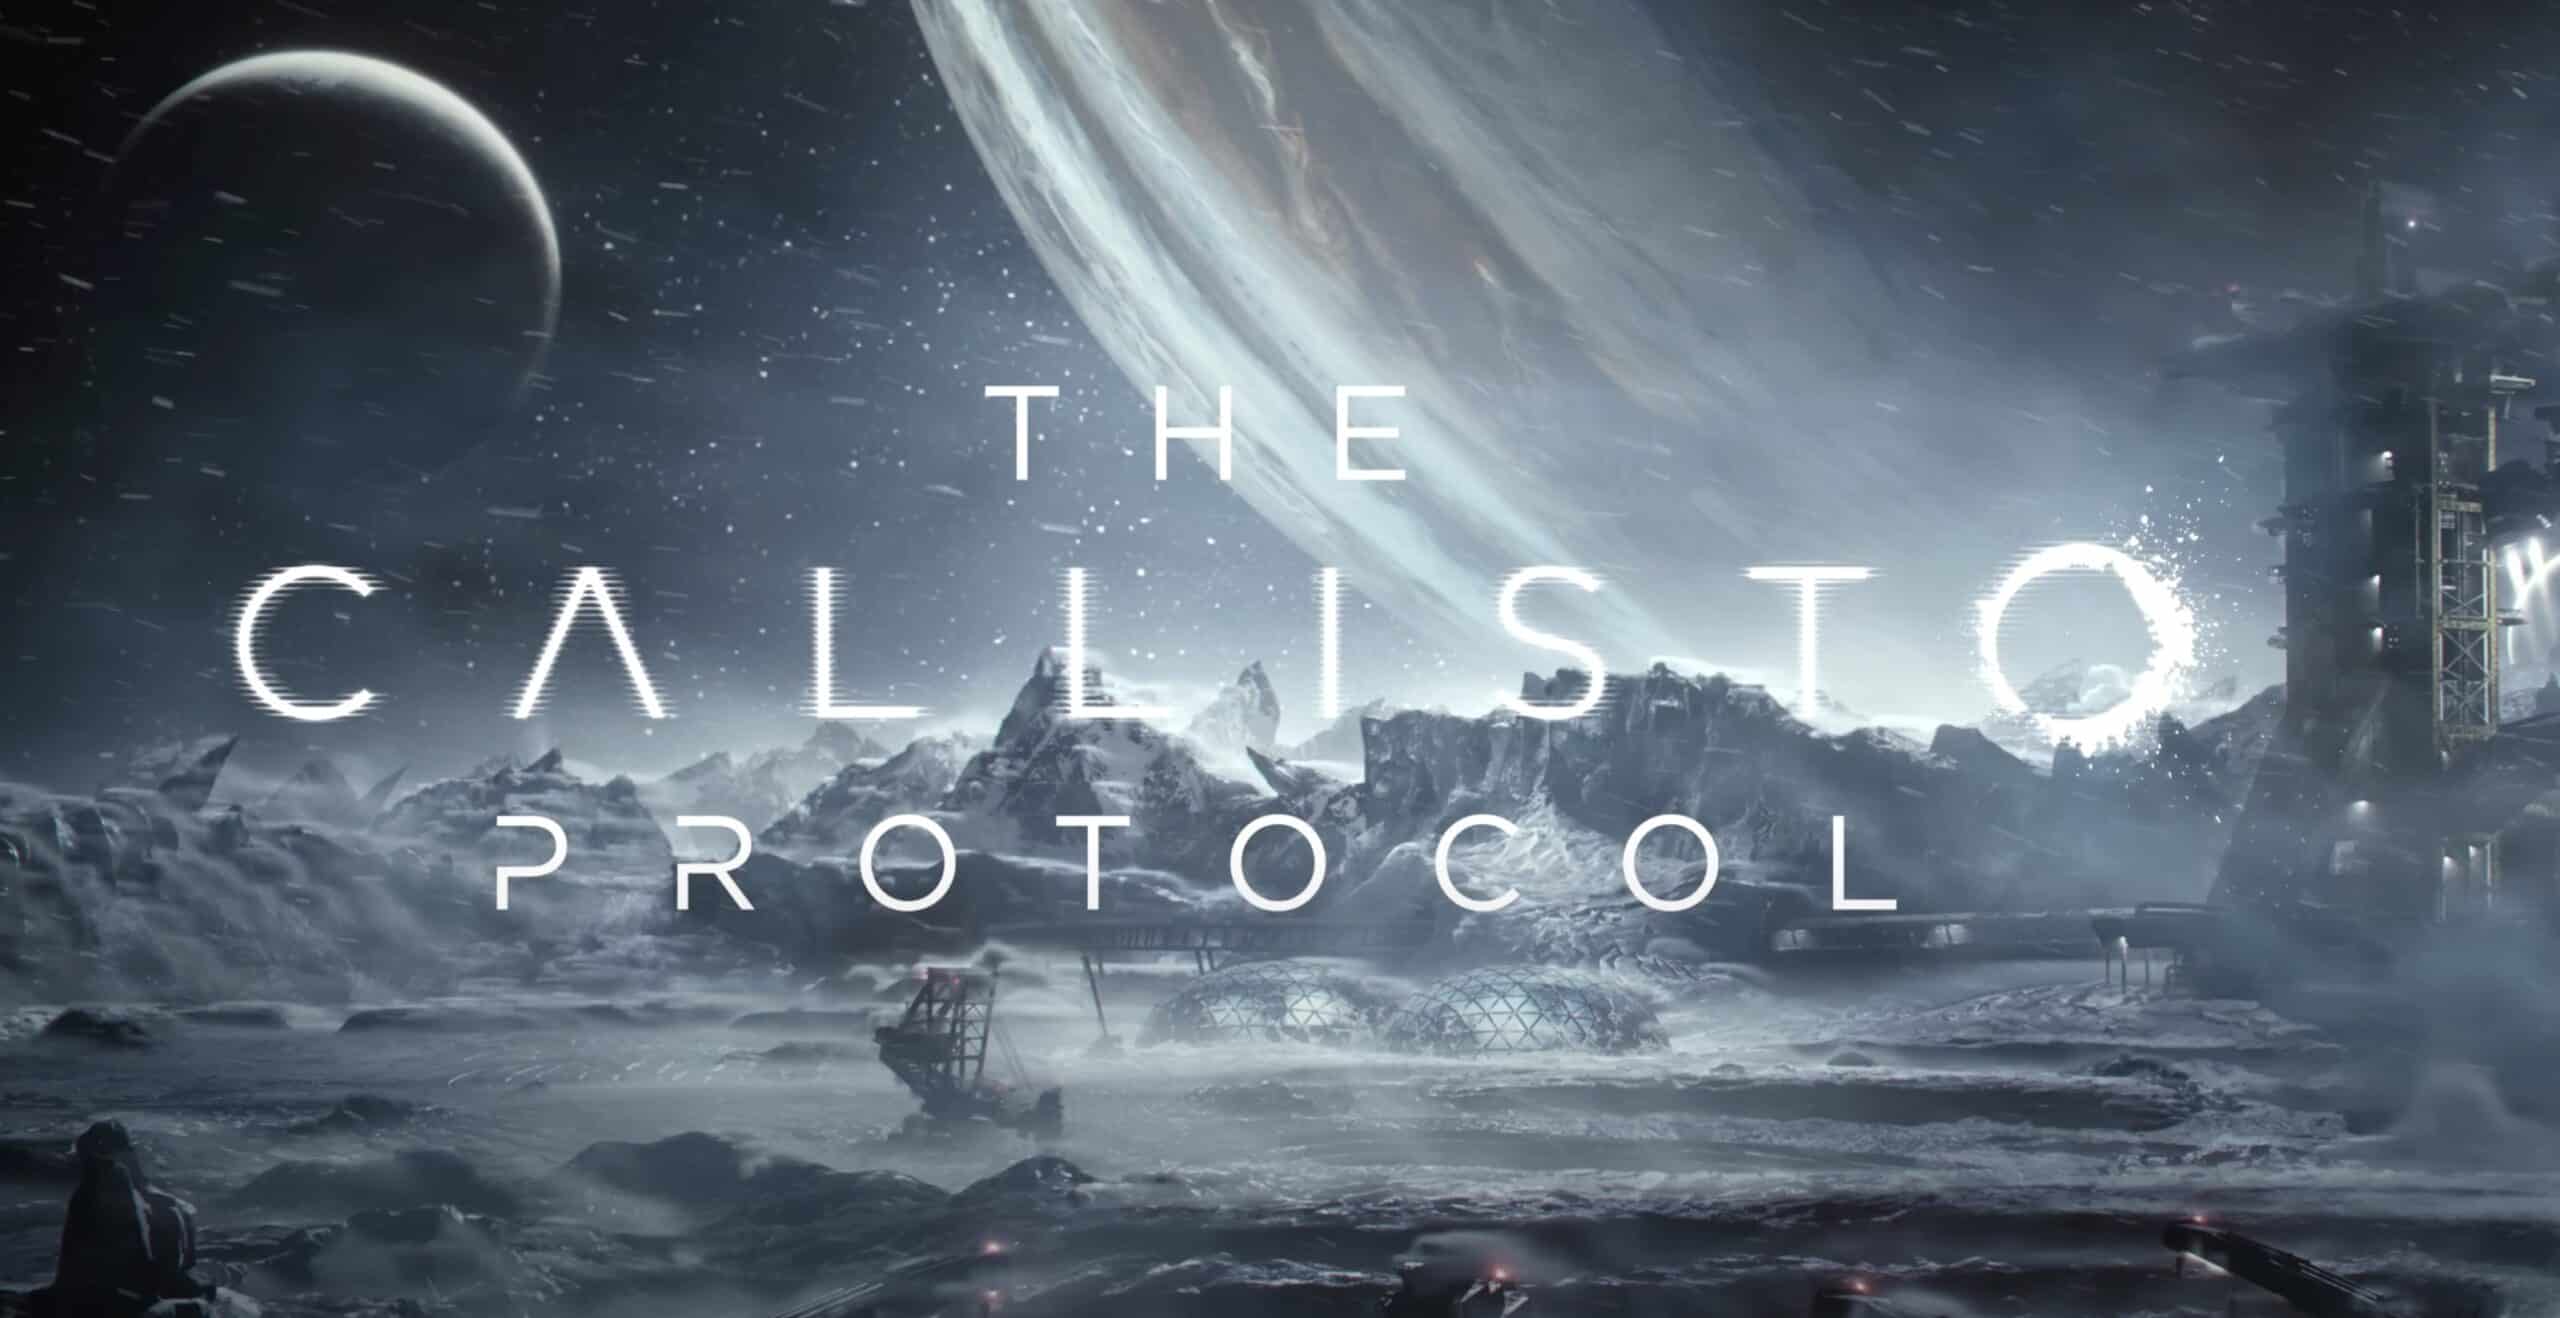 After disappointing sales and DLC, The Callisto Protocol studio